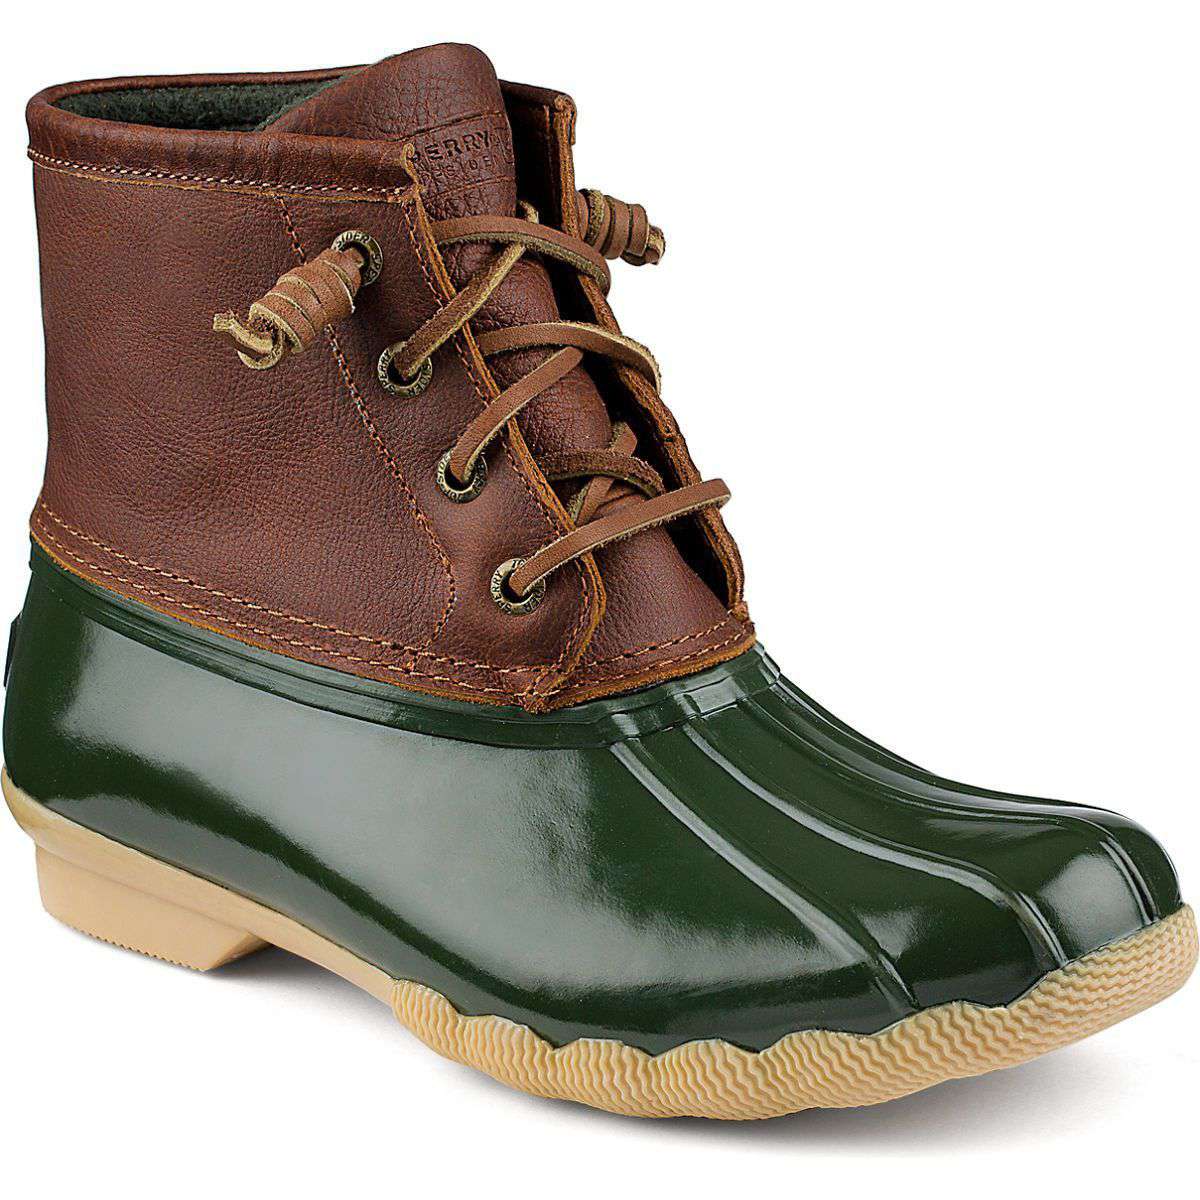 Women's Saltwater Duck Boot in Tan/Green by Sperry - Country Club Prep